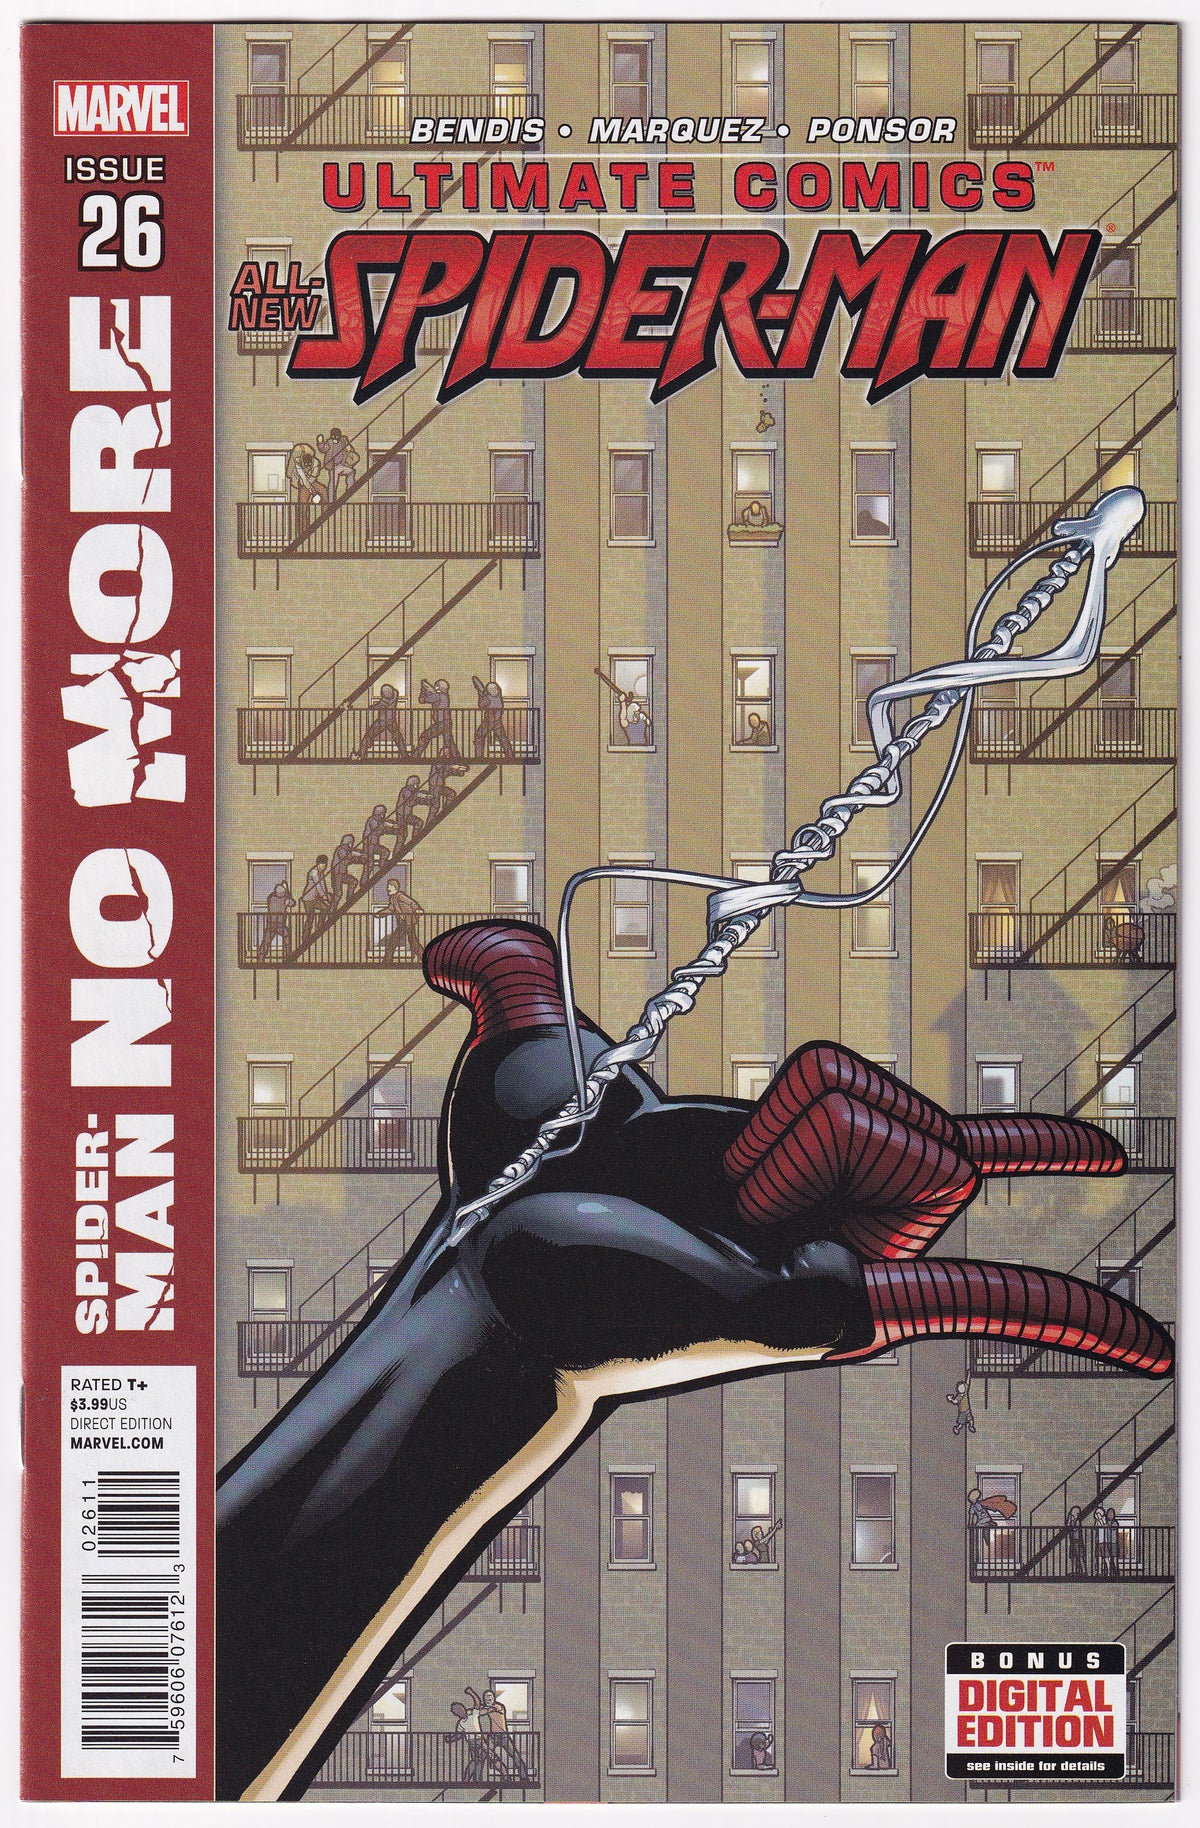 Photo of Ultimate Comics Spider-Man, Vol. 2 (2013)  Iss 26 Near Mint comic sold by Stronghold Collectibles